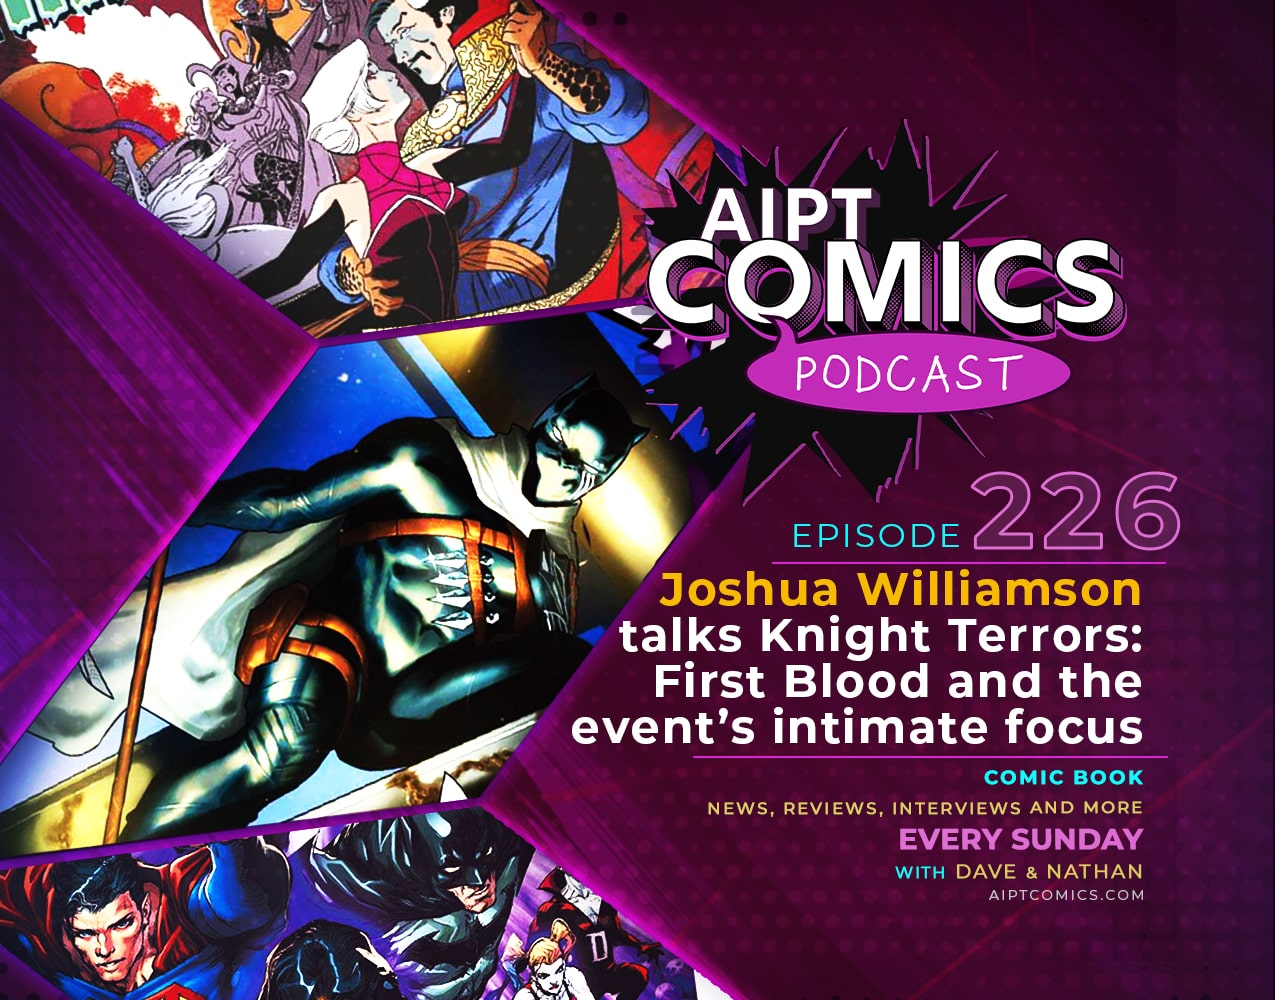 AIPT Comics Podcast episode 226: Joshua Williamson talks ‘Knight Terrors: First Blood’ #1 and the event’s intimate focus